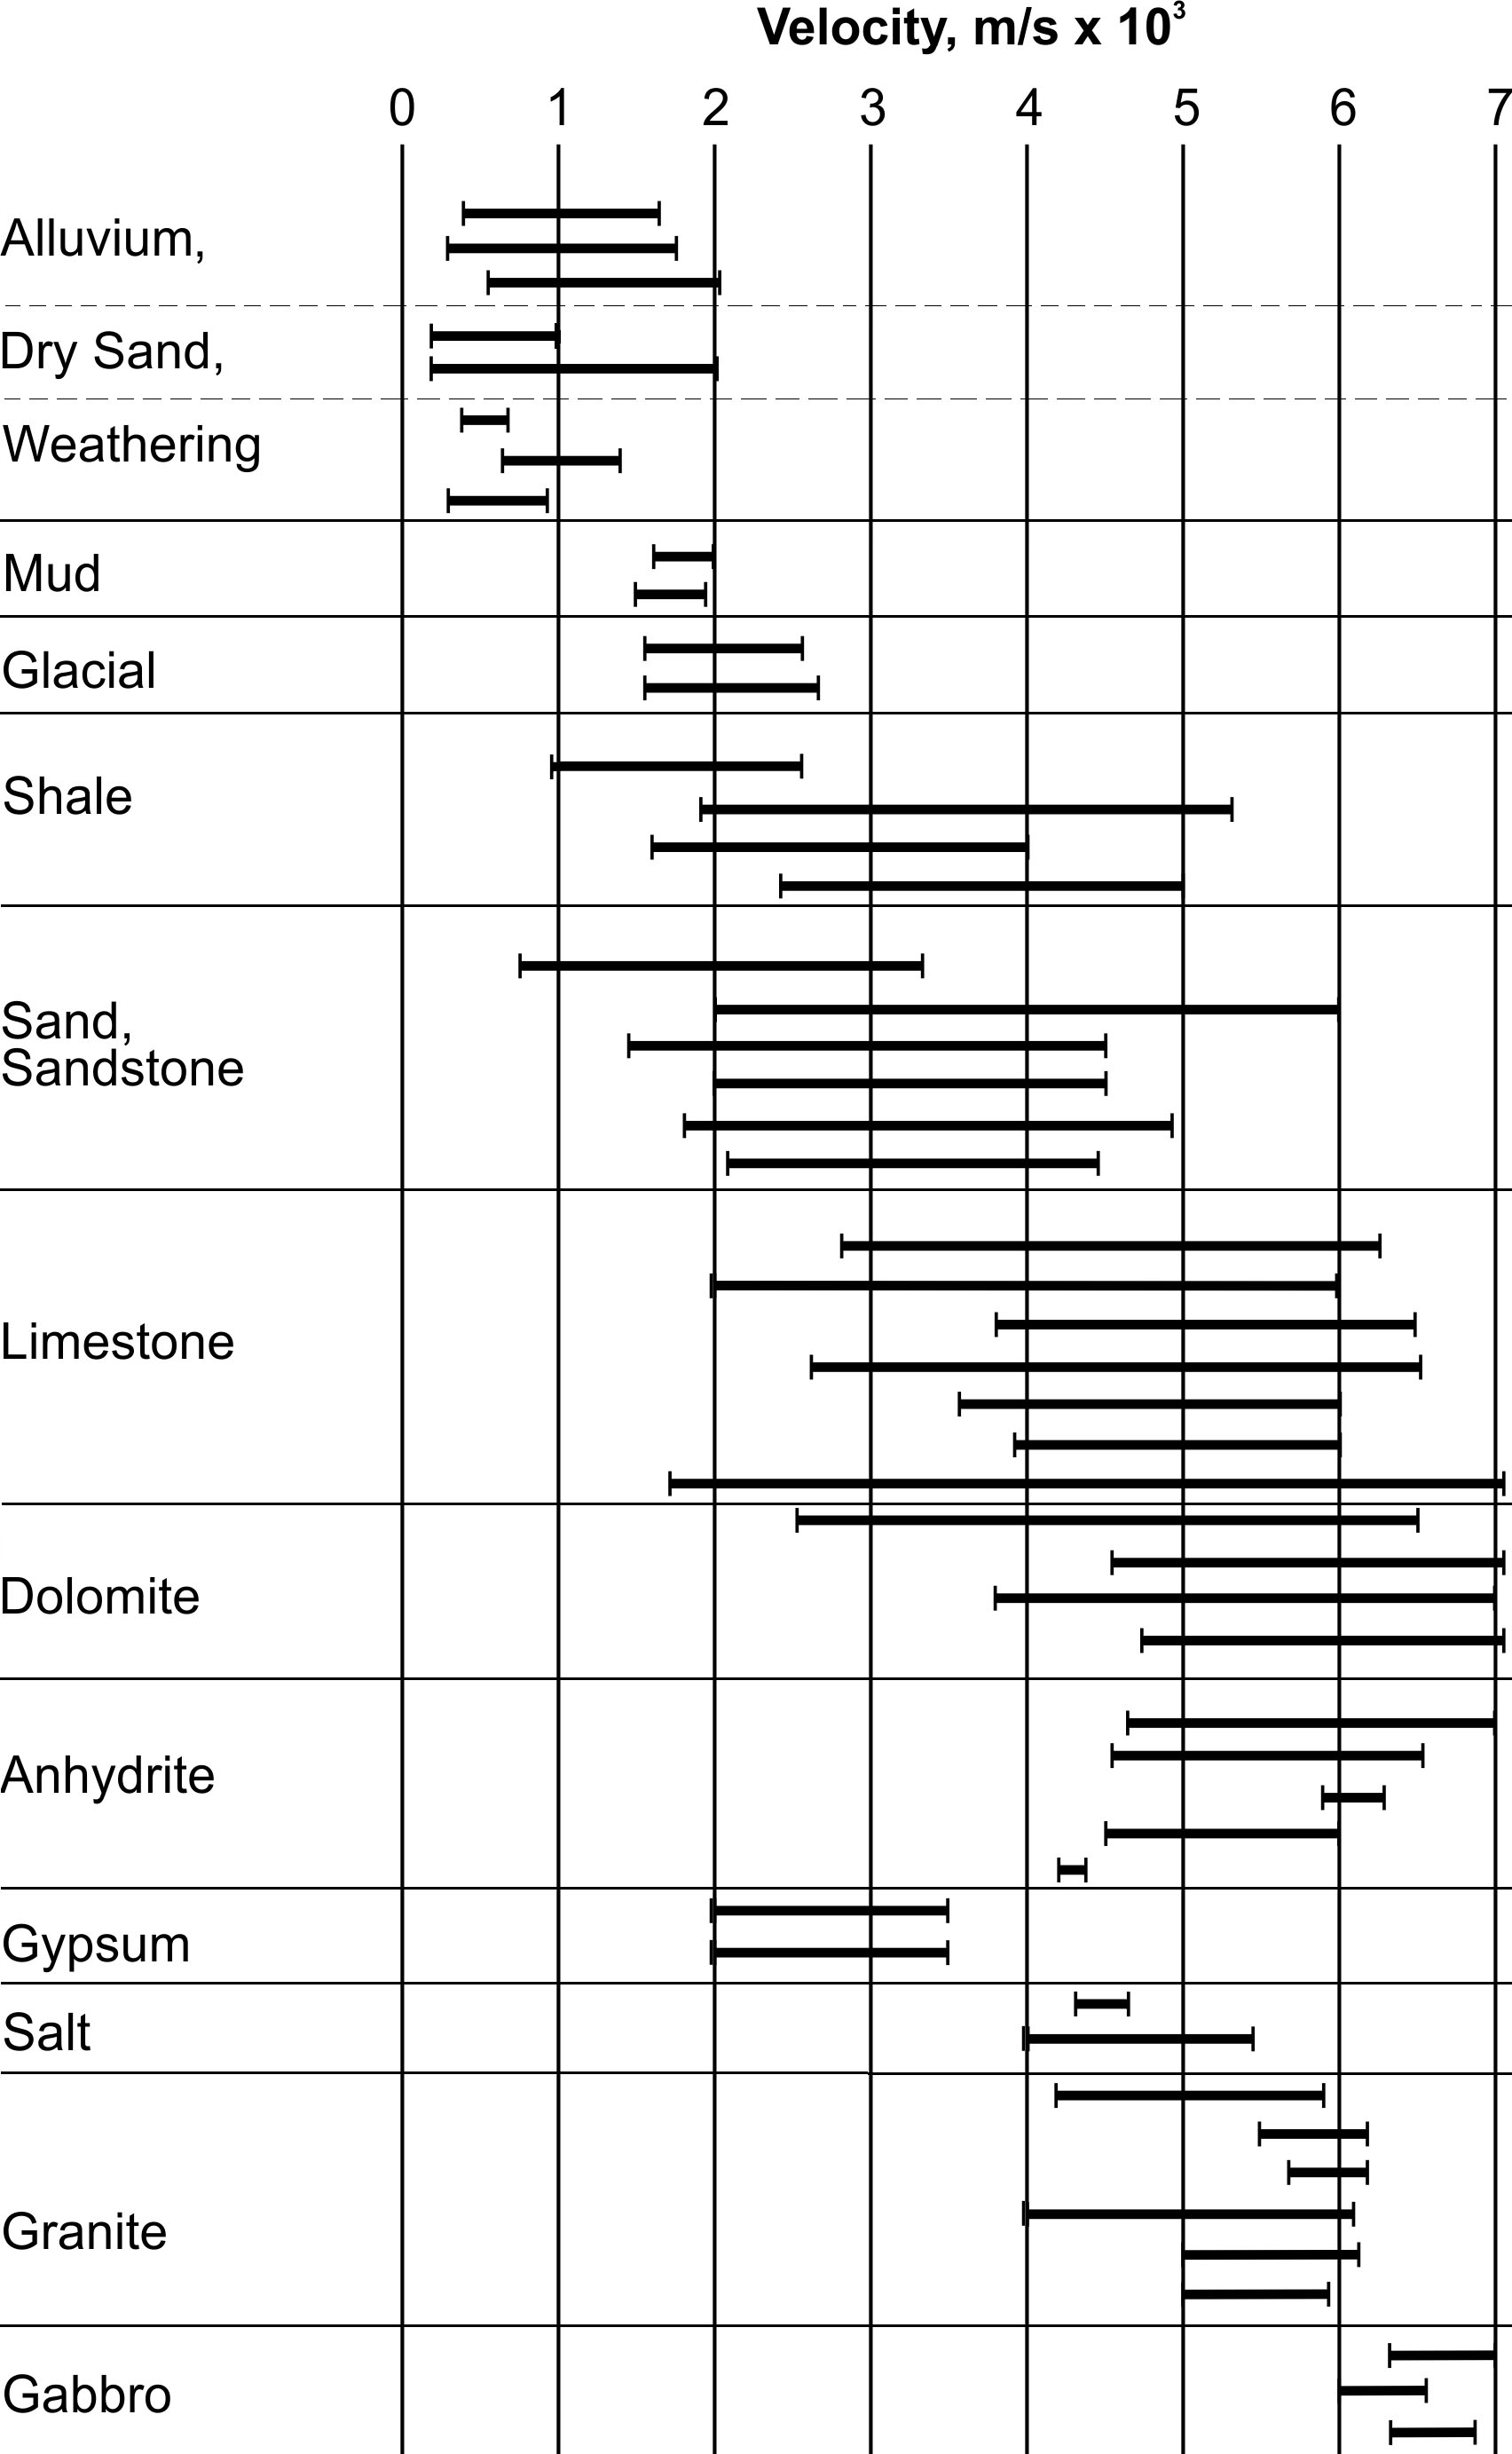 Seismic velocities of different rock types. (Modified from Exploration Seismology, R.E. Sheriff and L.P. Geldart)